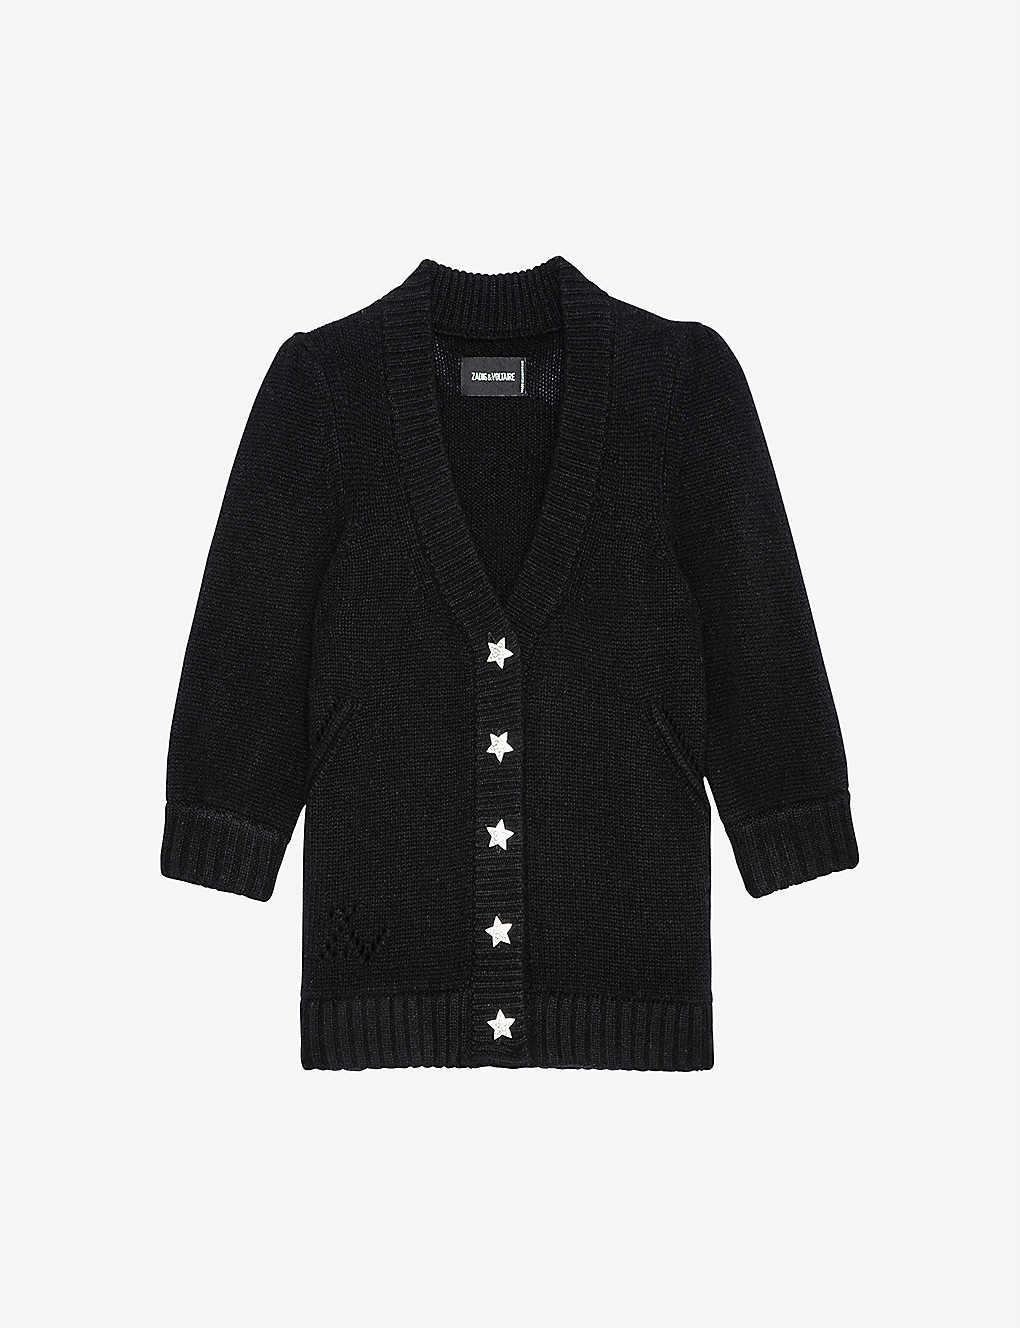 Zadig & Voltaire Betsy Star-button V-neck Cashmere Cardigan in Black | Lyst